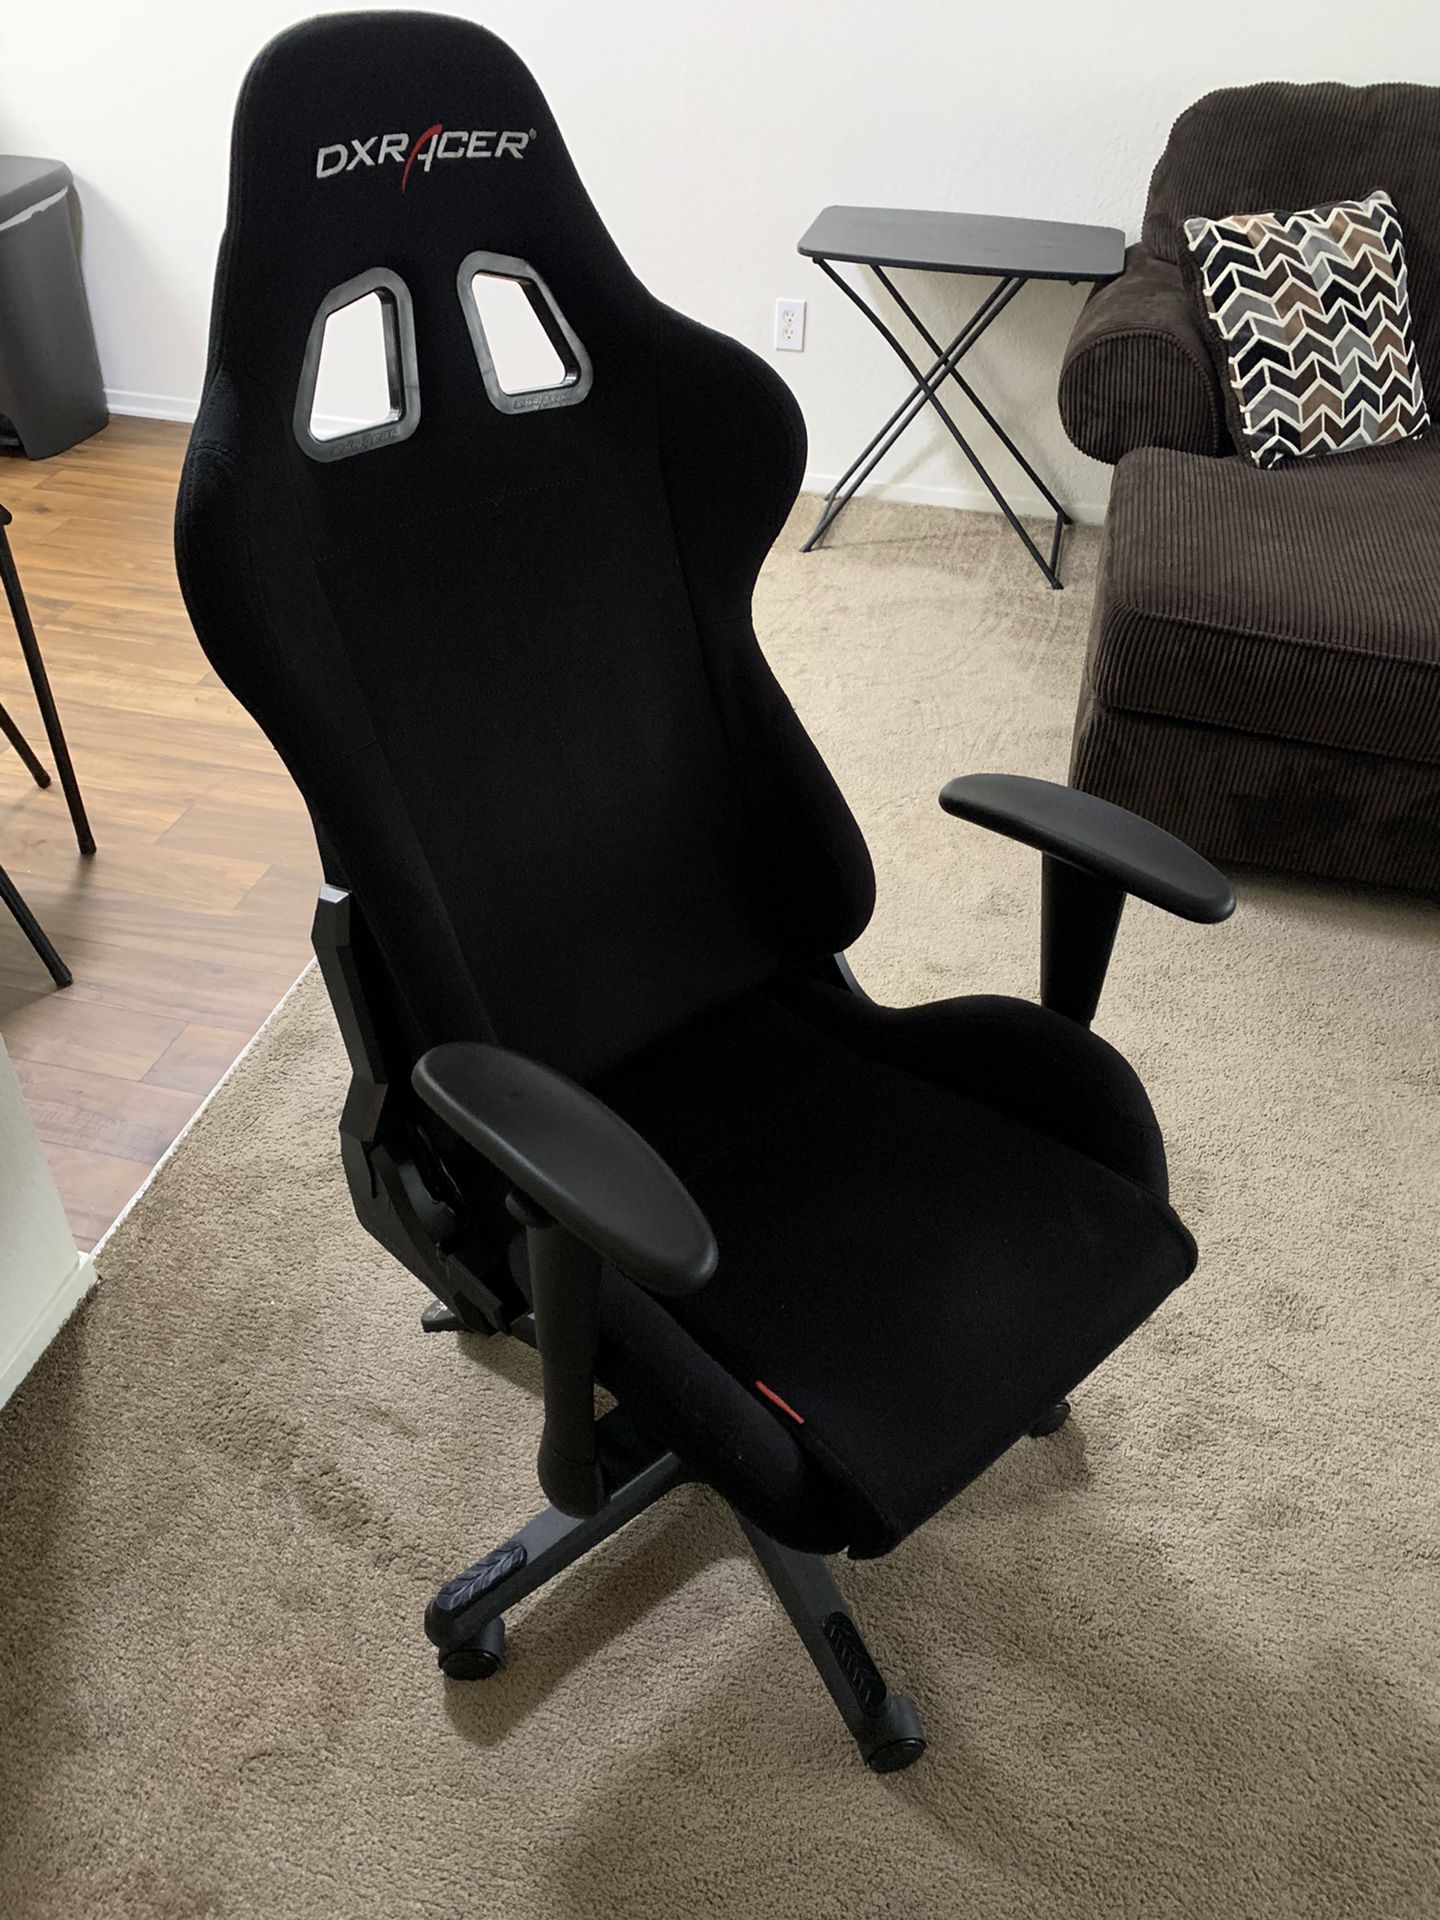 Dxracer Gaming Chair For Sale